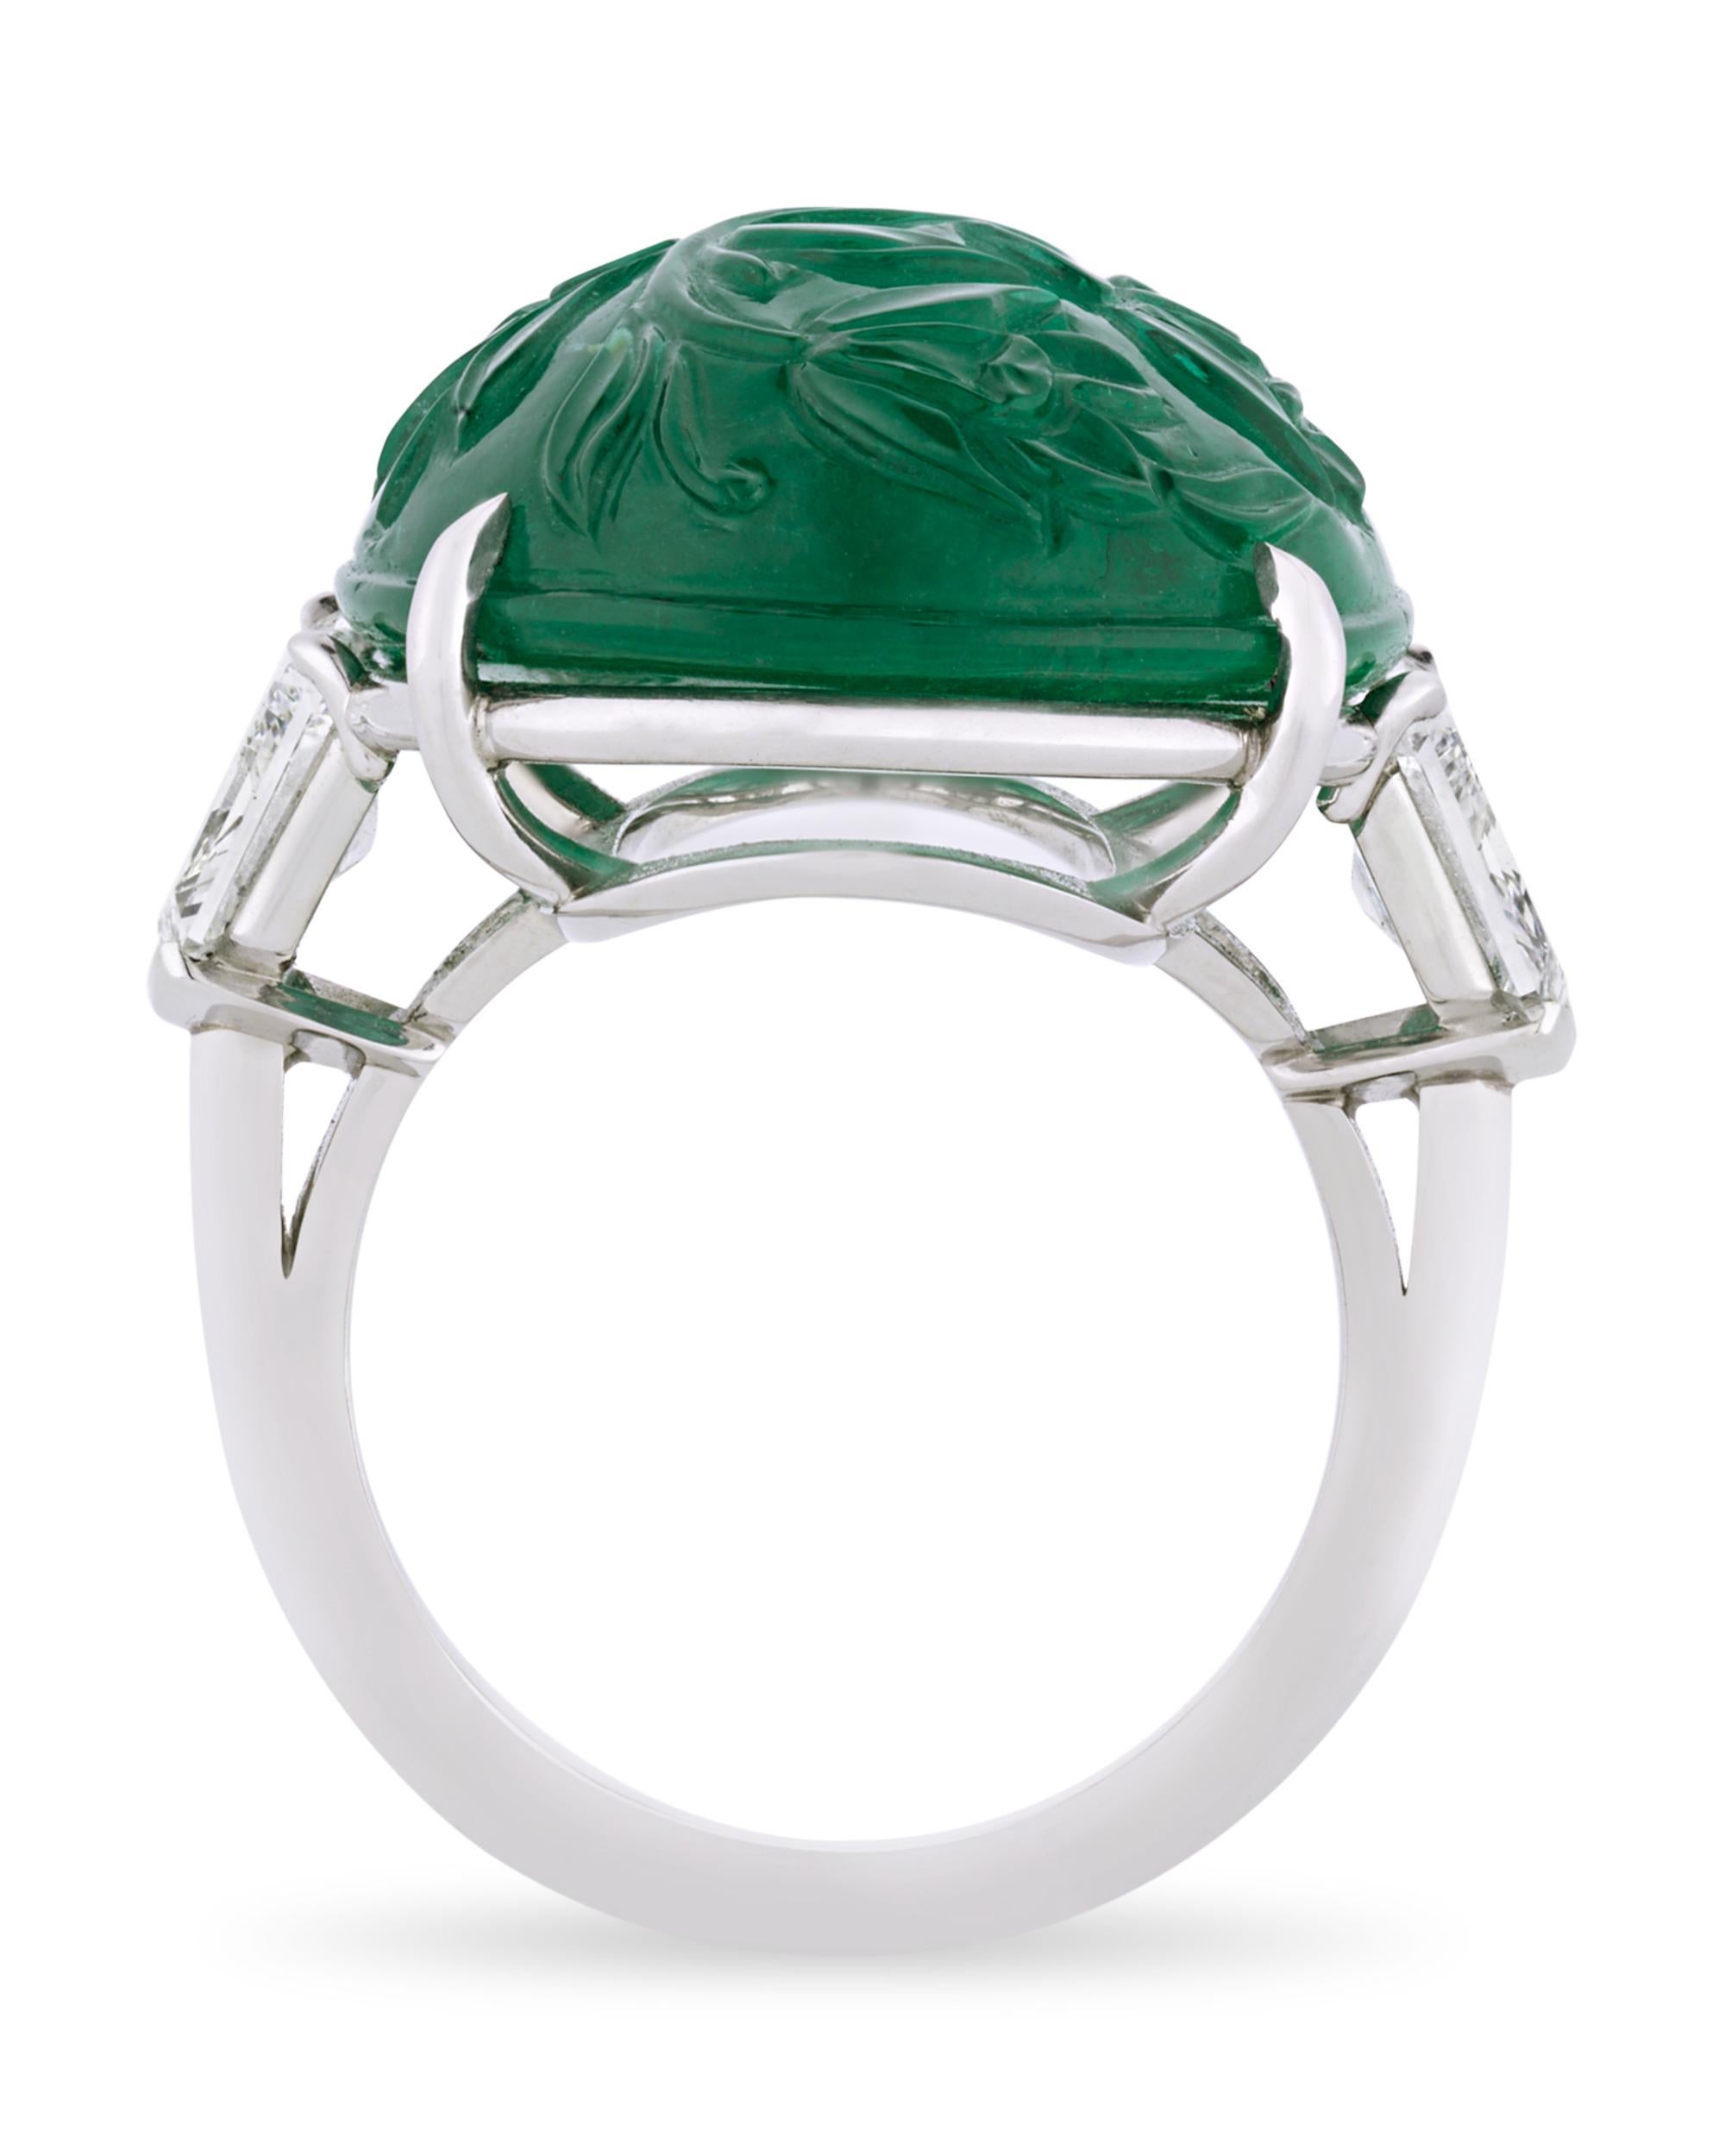 Contemporary Carved Zambian Emerald Ring, 24.05 Carats